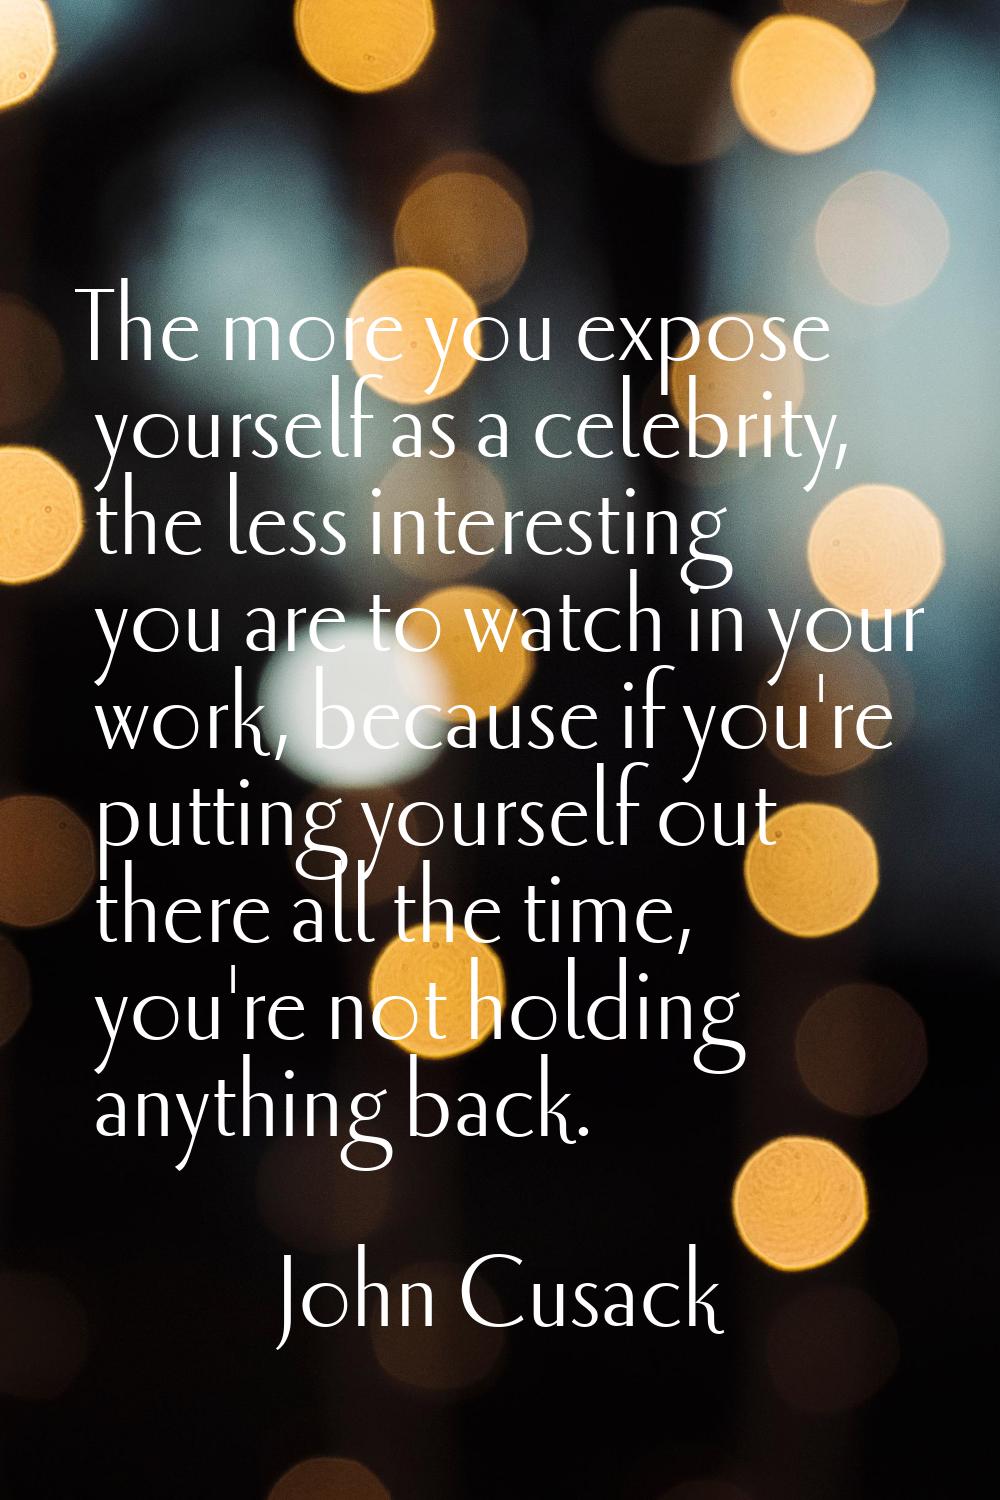 The more you expose yourself as a celebrity, the less interesting you are to watch in your work, be